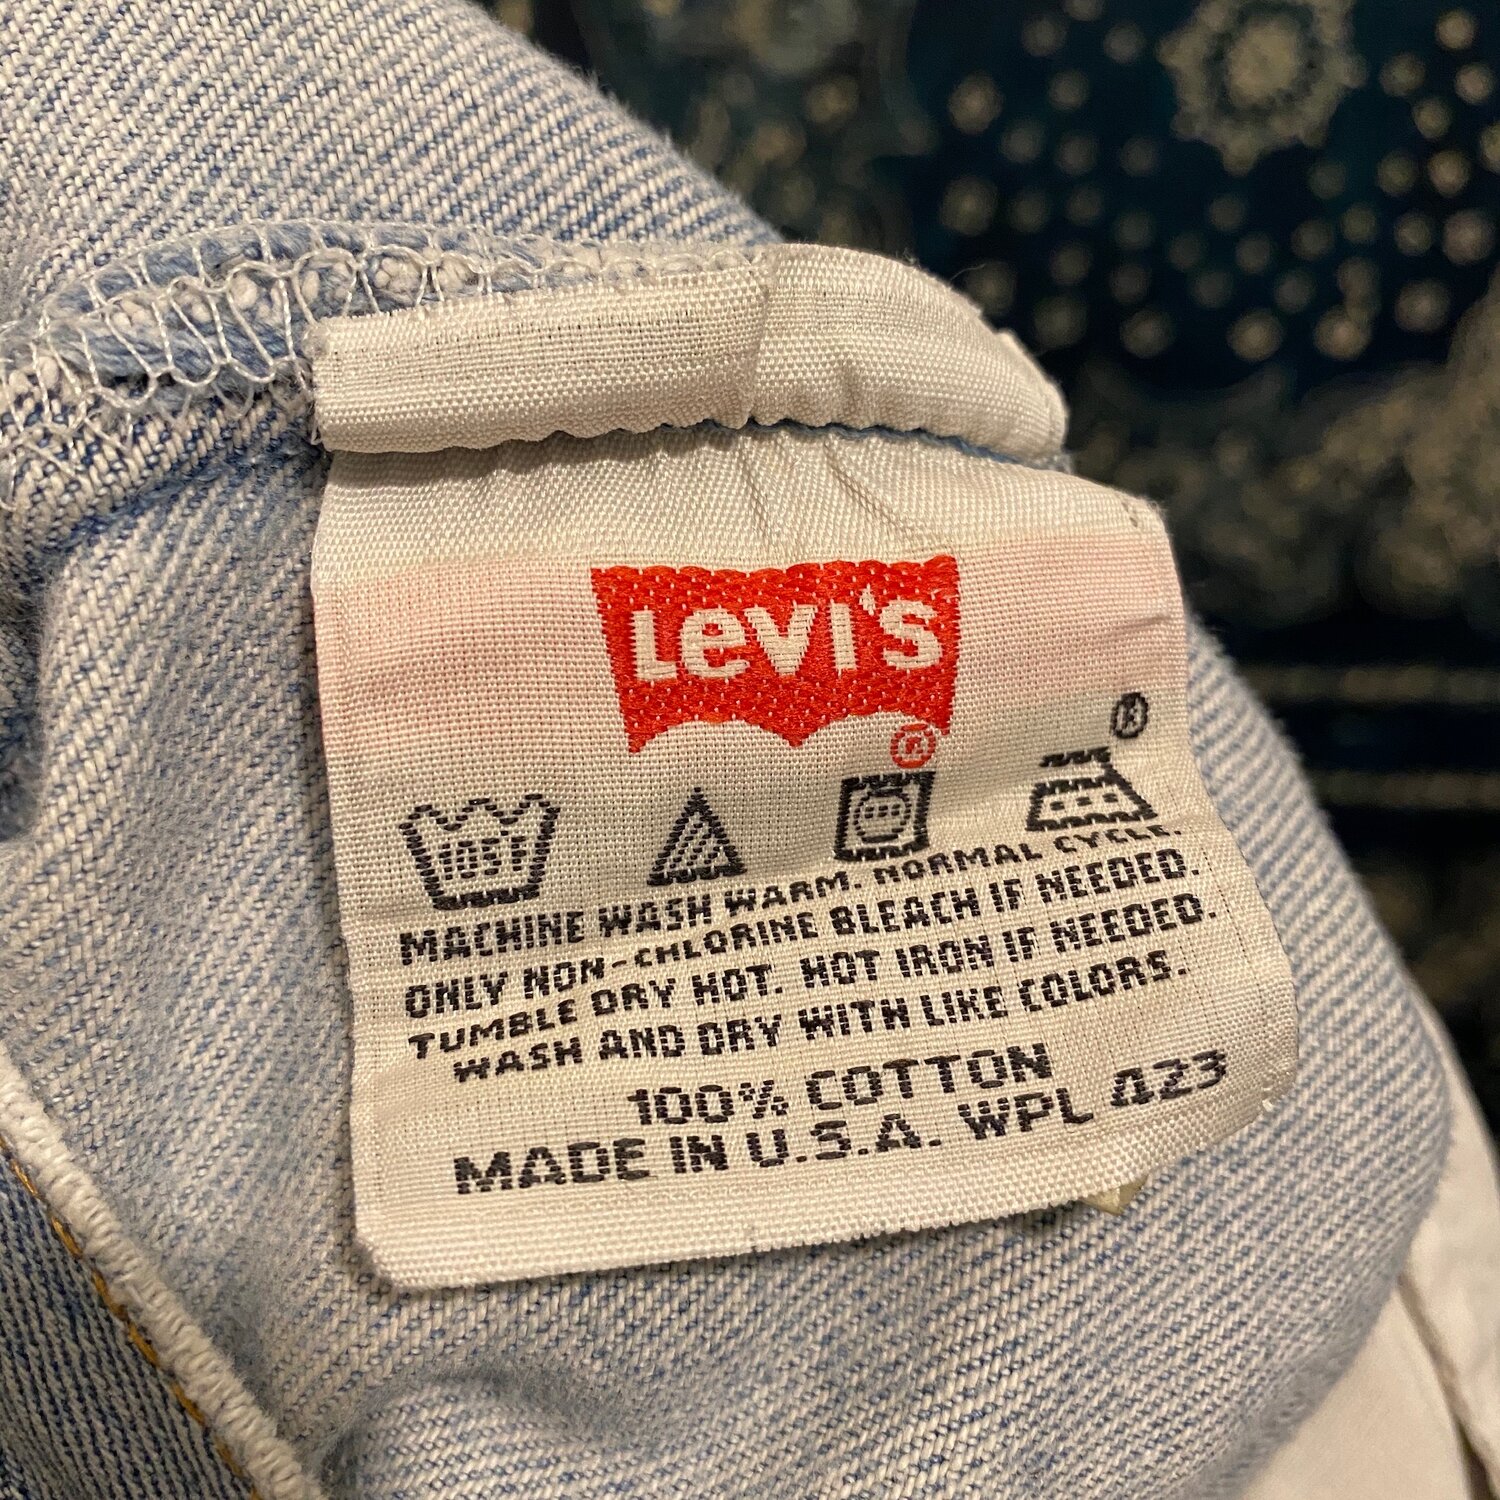 Vintage Levis 501 // size 27 — Mello and Sons